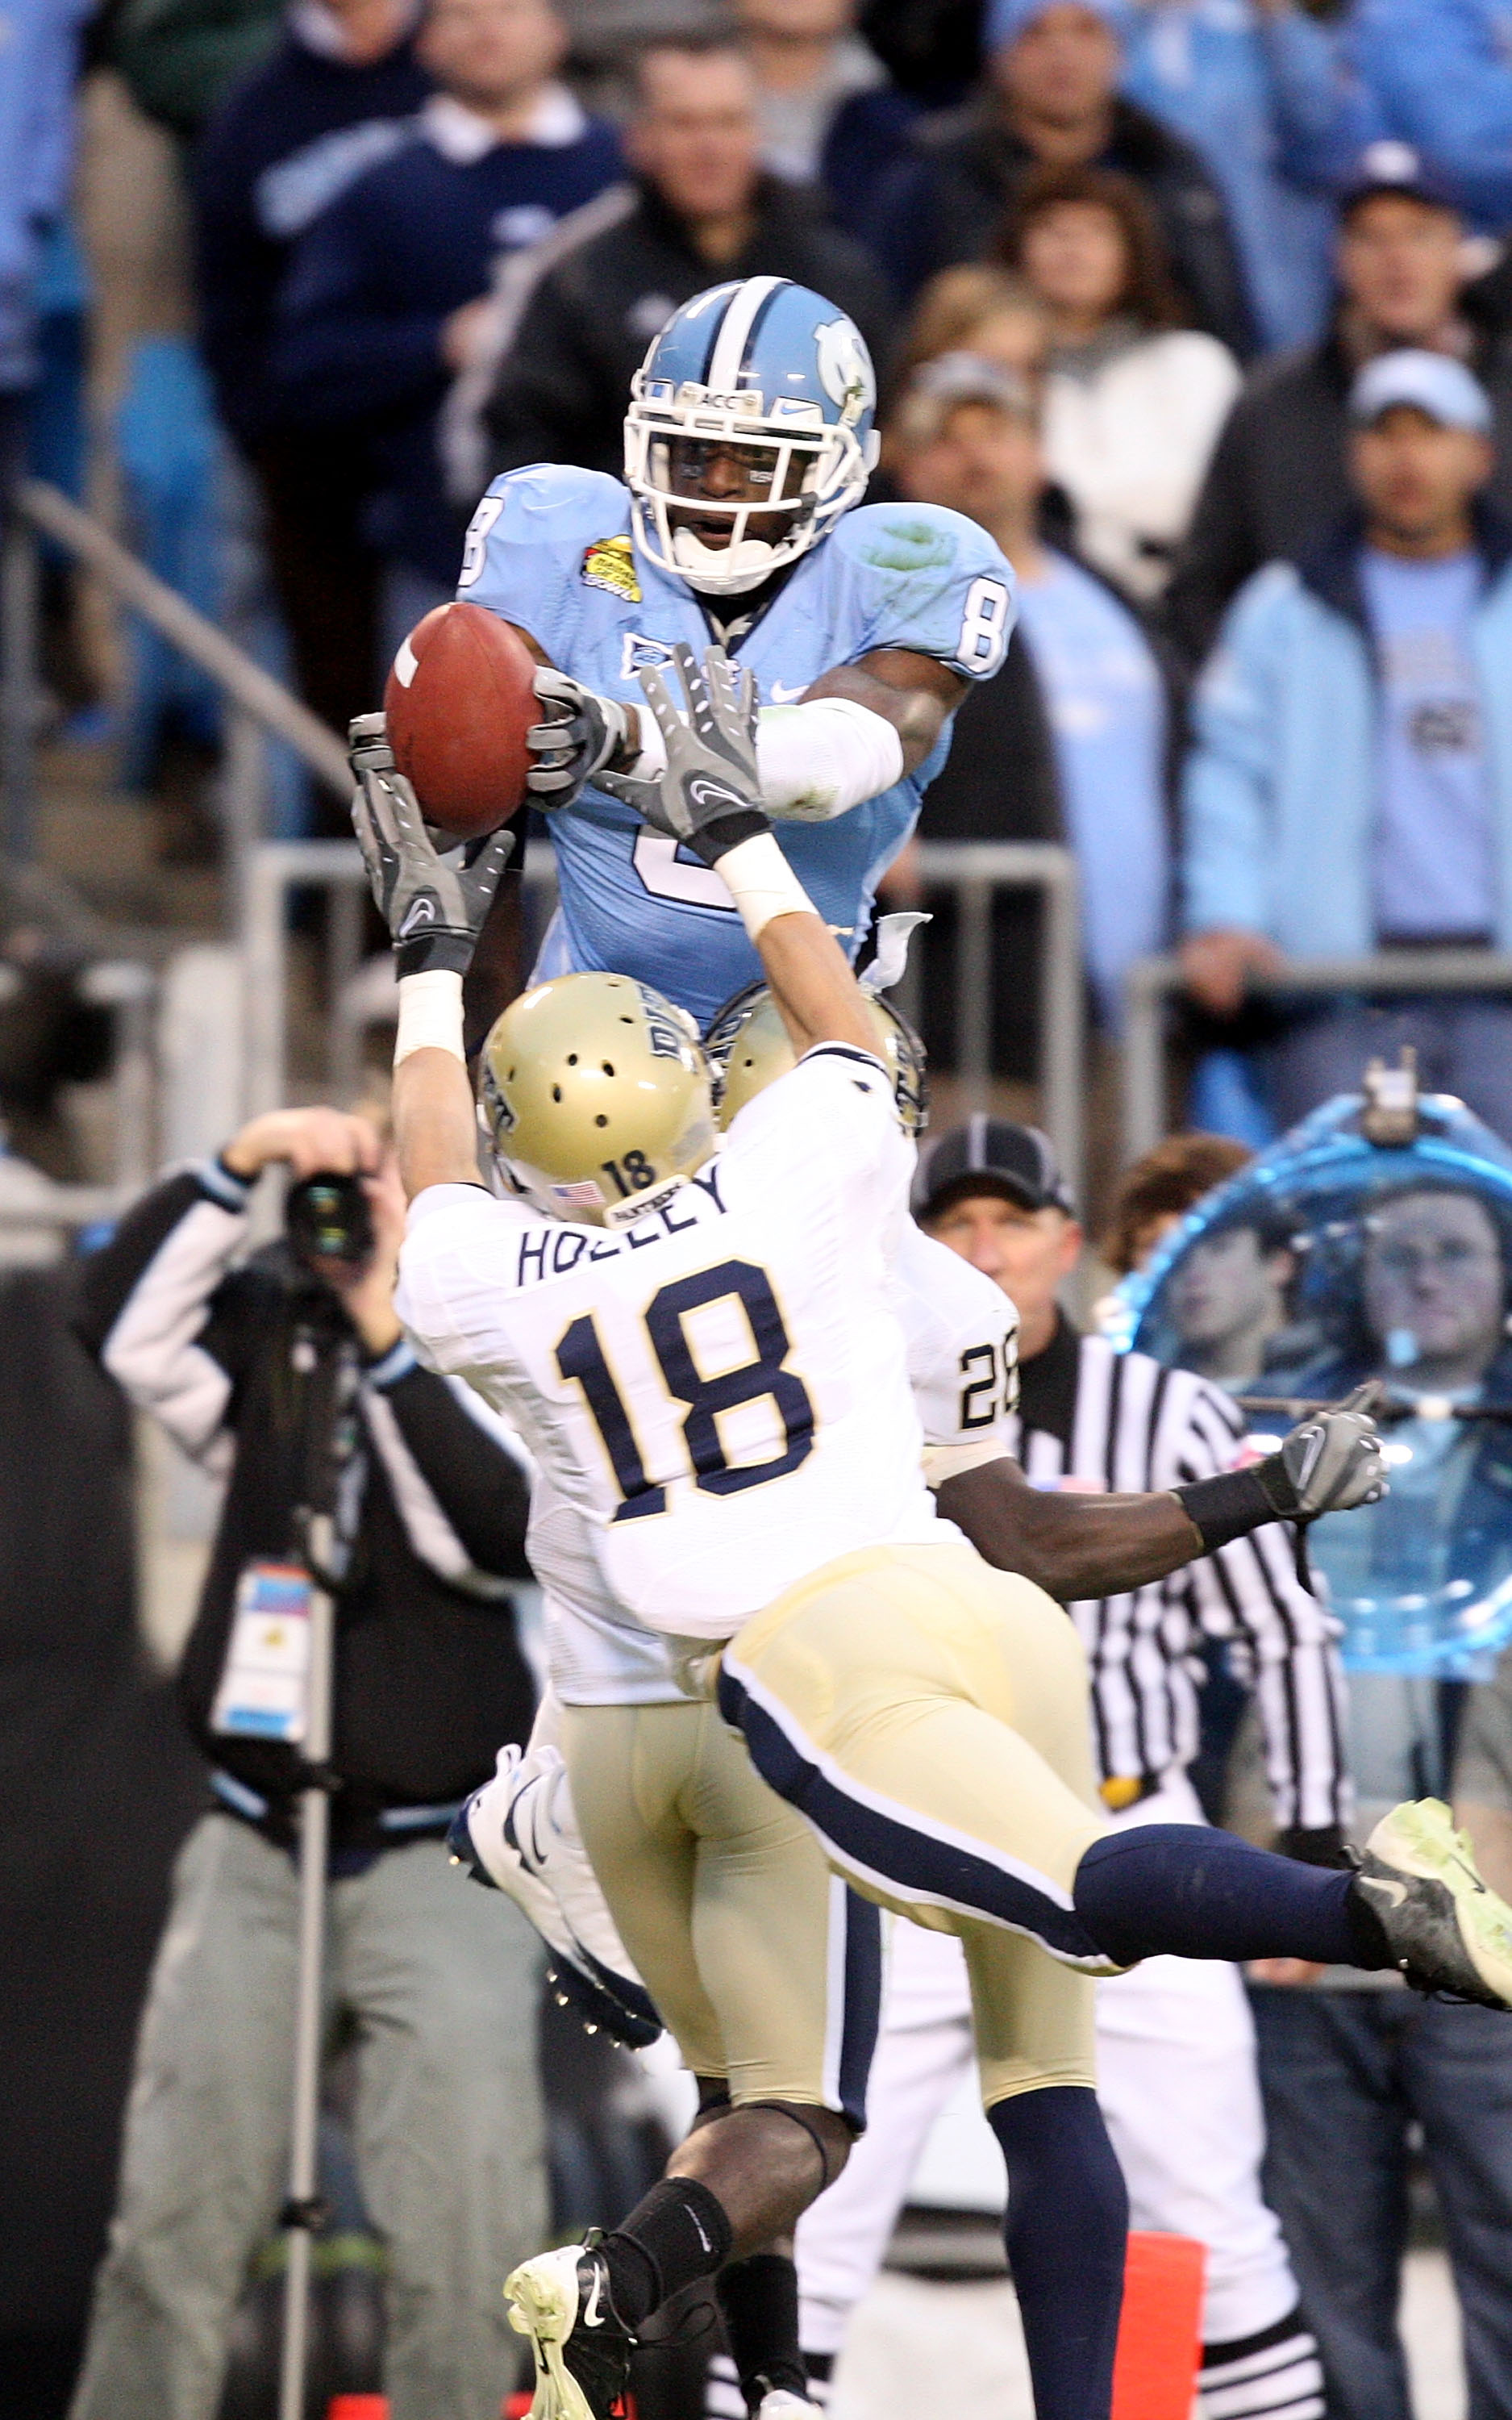 CHARLOTTE, NC - DECEMBER 26:  Jarred Holley #18 of the Pittsburgh Panthers watches as Greg Little #8 of the North Carolina Tar Heels catches a touchdown during their game on December 26, 2009 in Charlotte, North Carolina.  (Photo by Streeter Lecka/Getty I